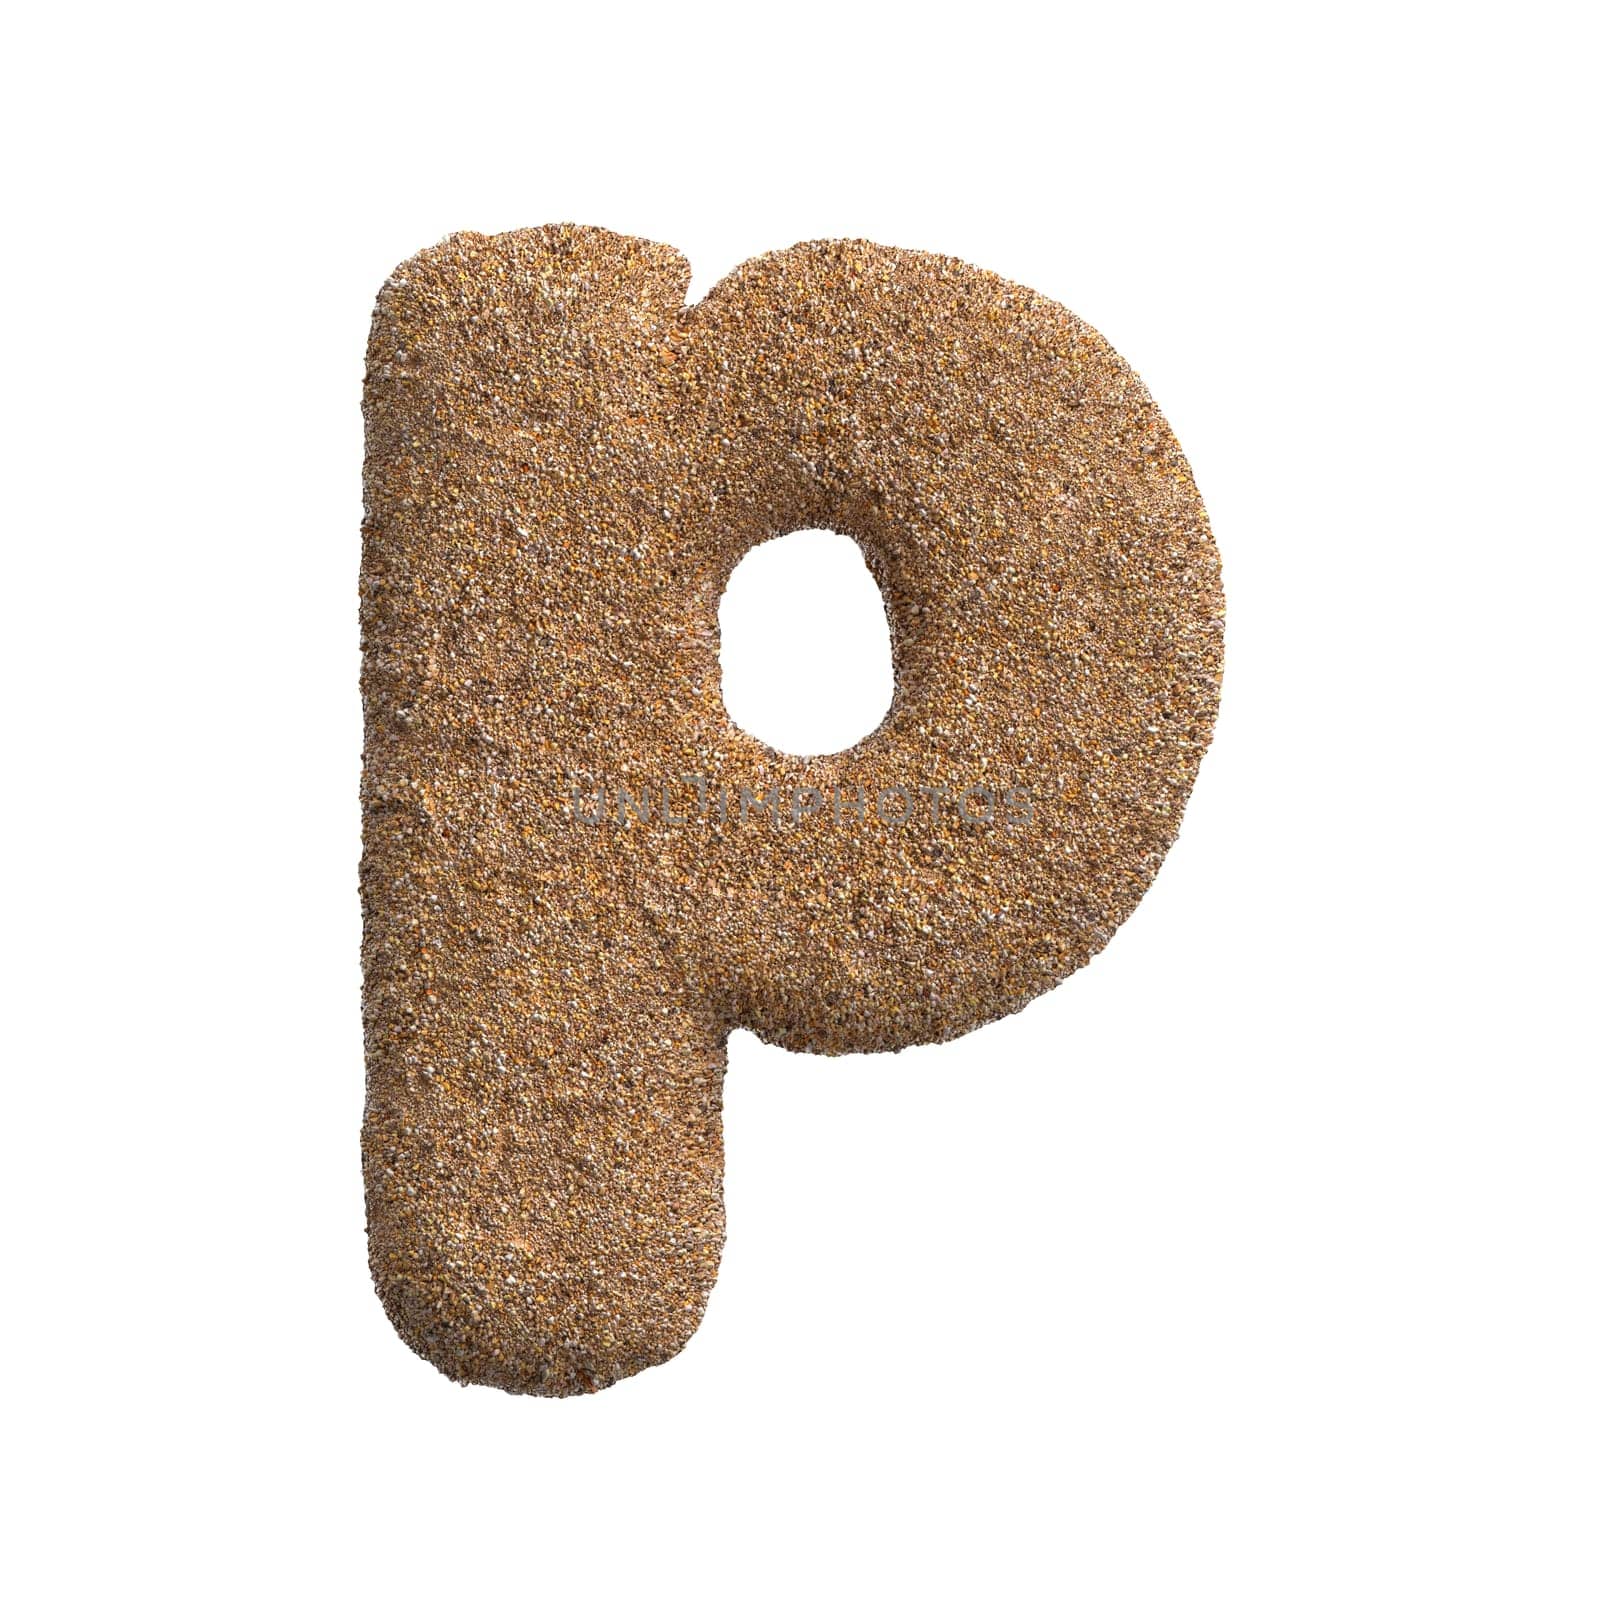 Sand letter P - Lowercase 3d beach font - Holidays, travel or ocean concepts by chrisroll